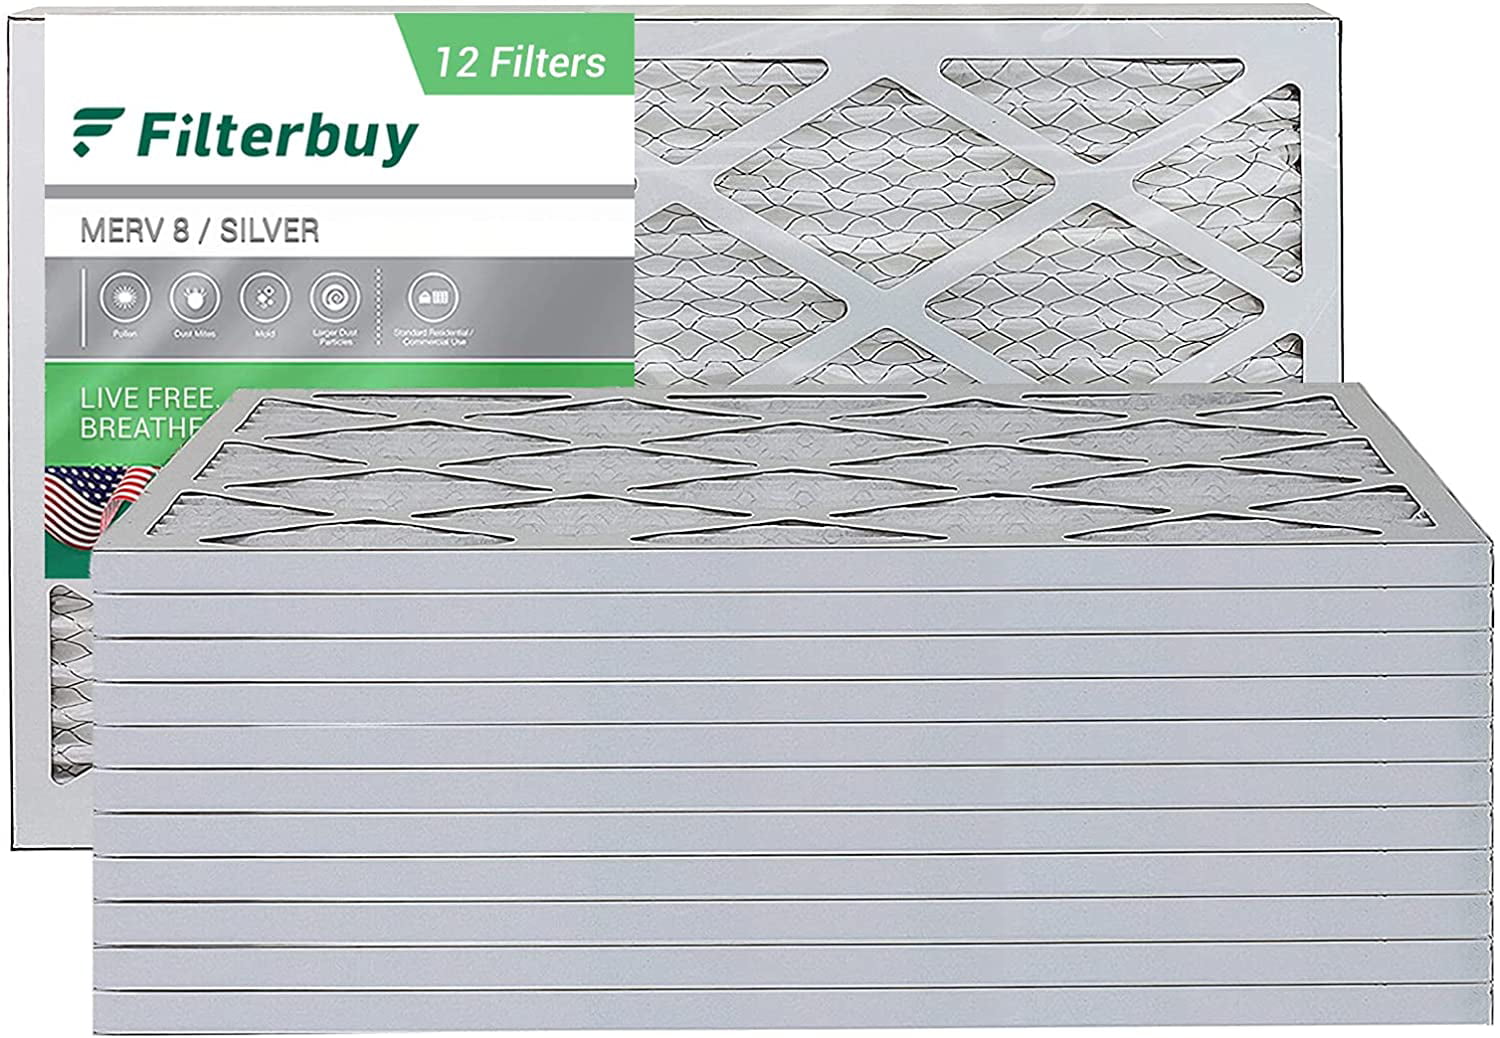 Pack of 12 Filters 18x30x1 Gold FilterBuy 18x30x1 MERV 11 Pleated AC Furnace Air Filter, 